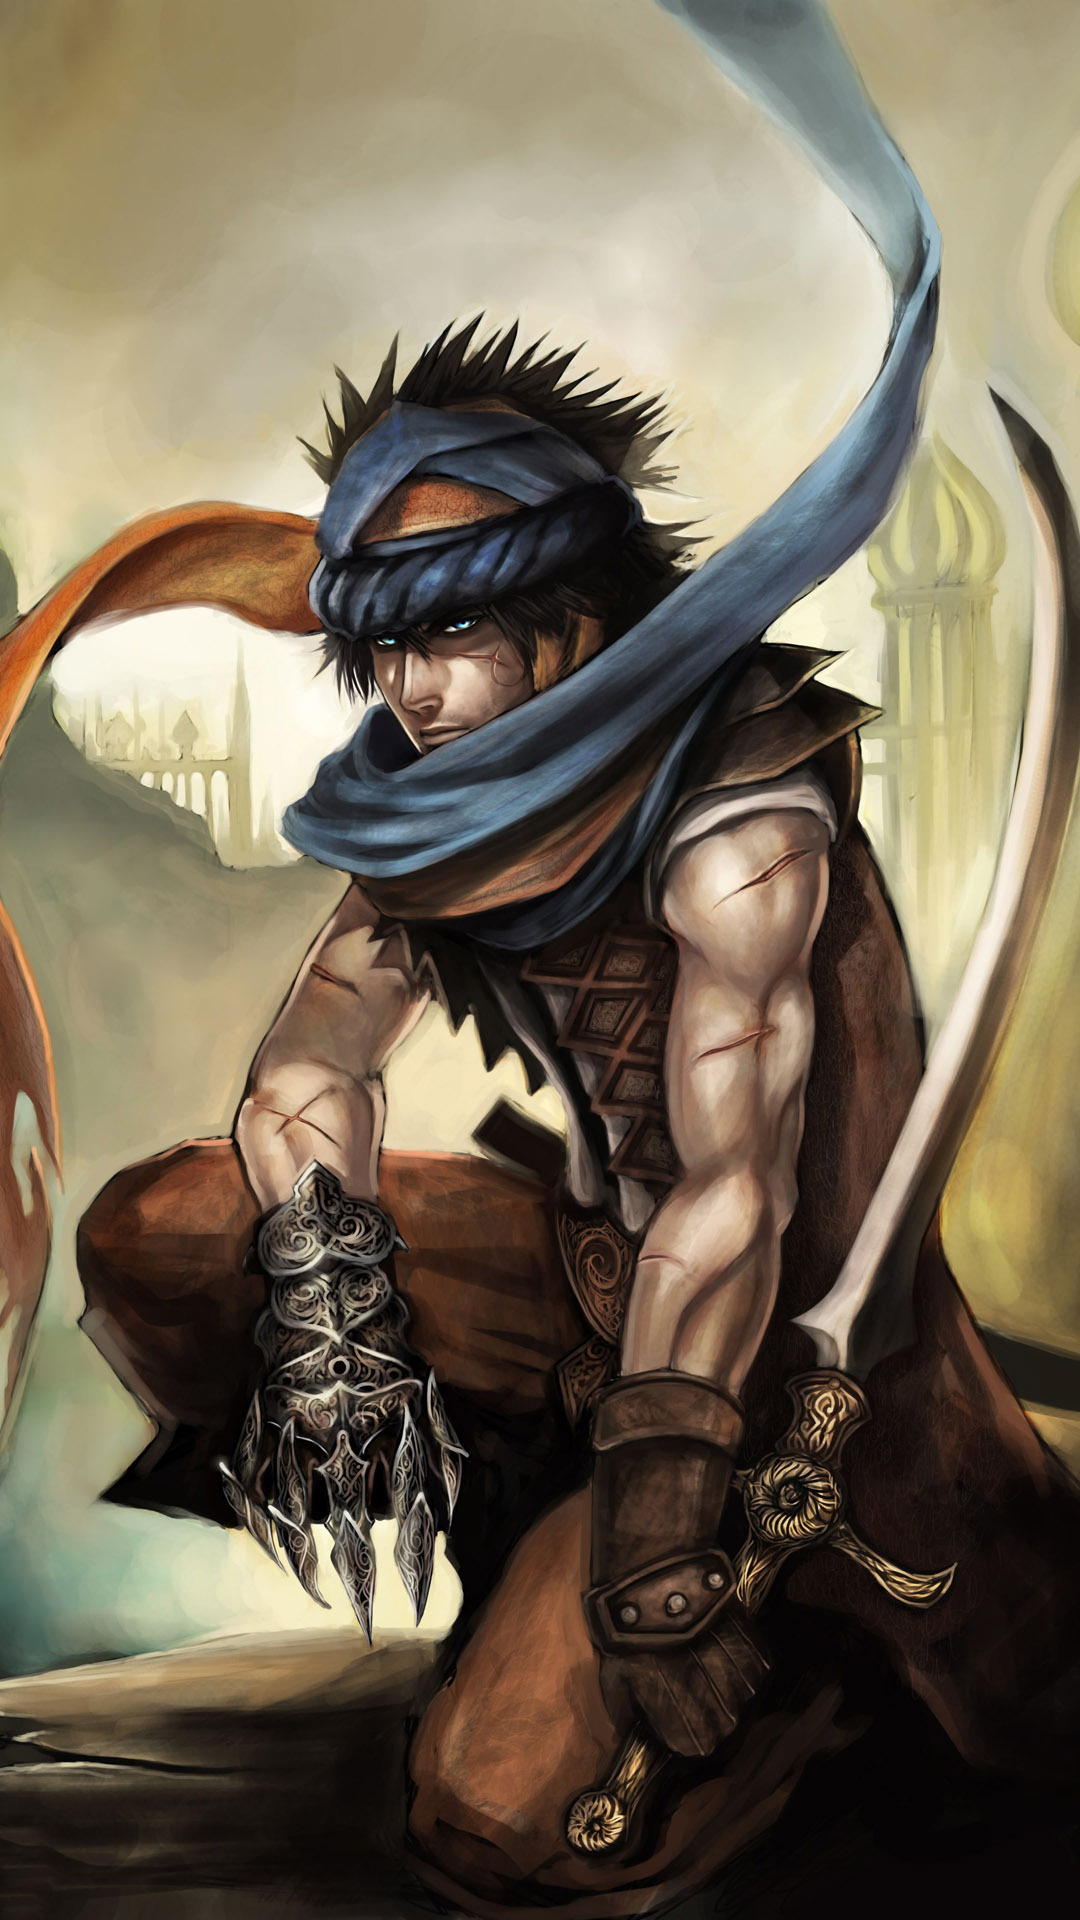 Prince of persia 5 download